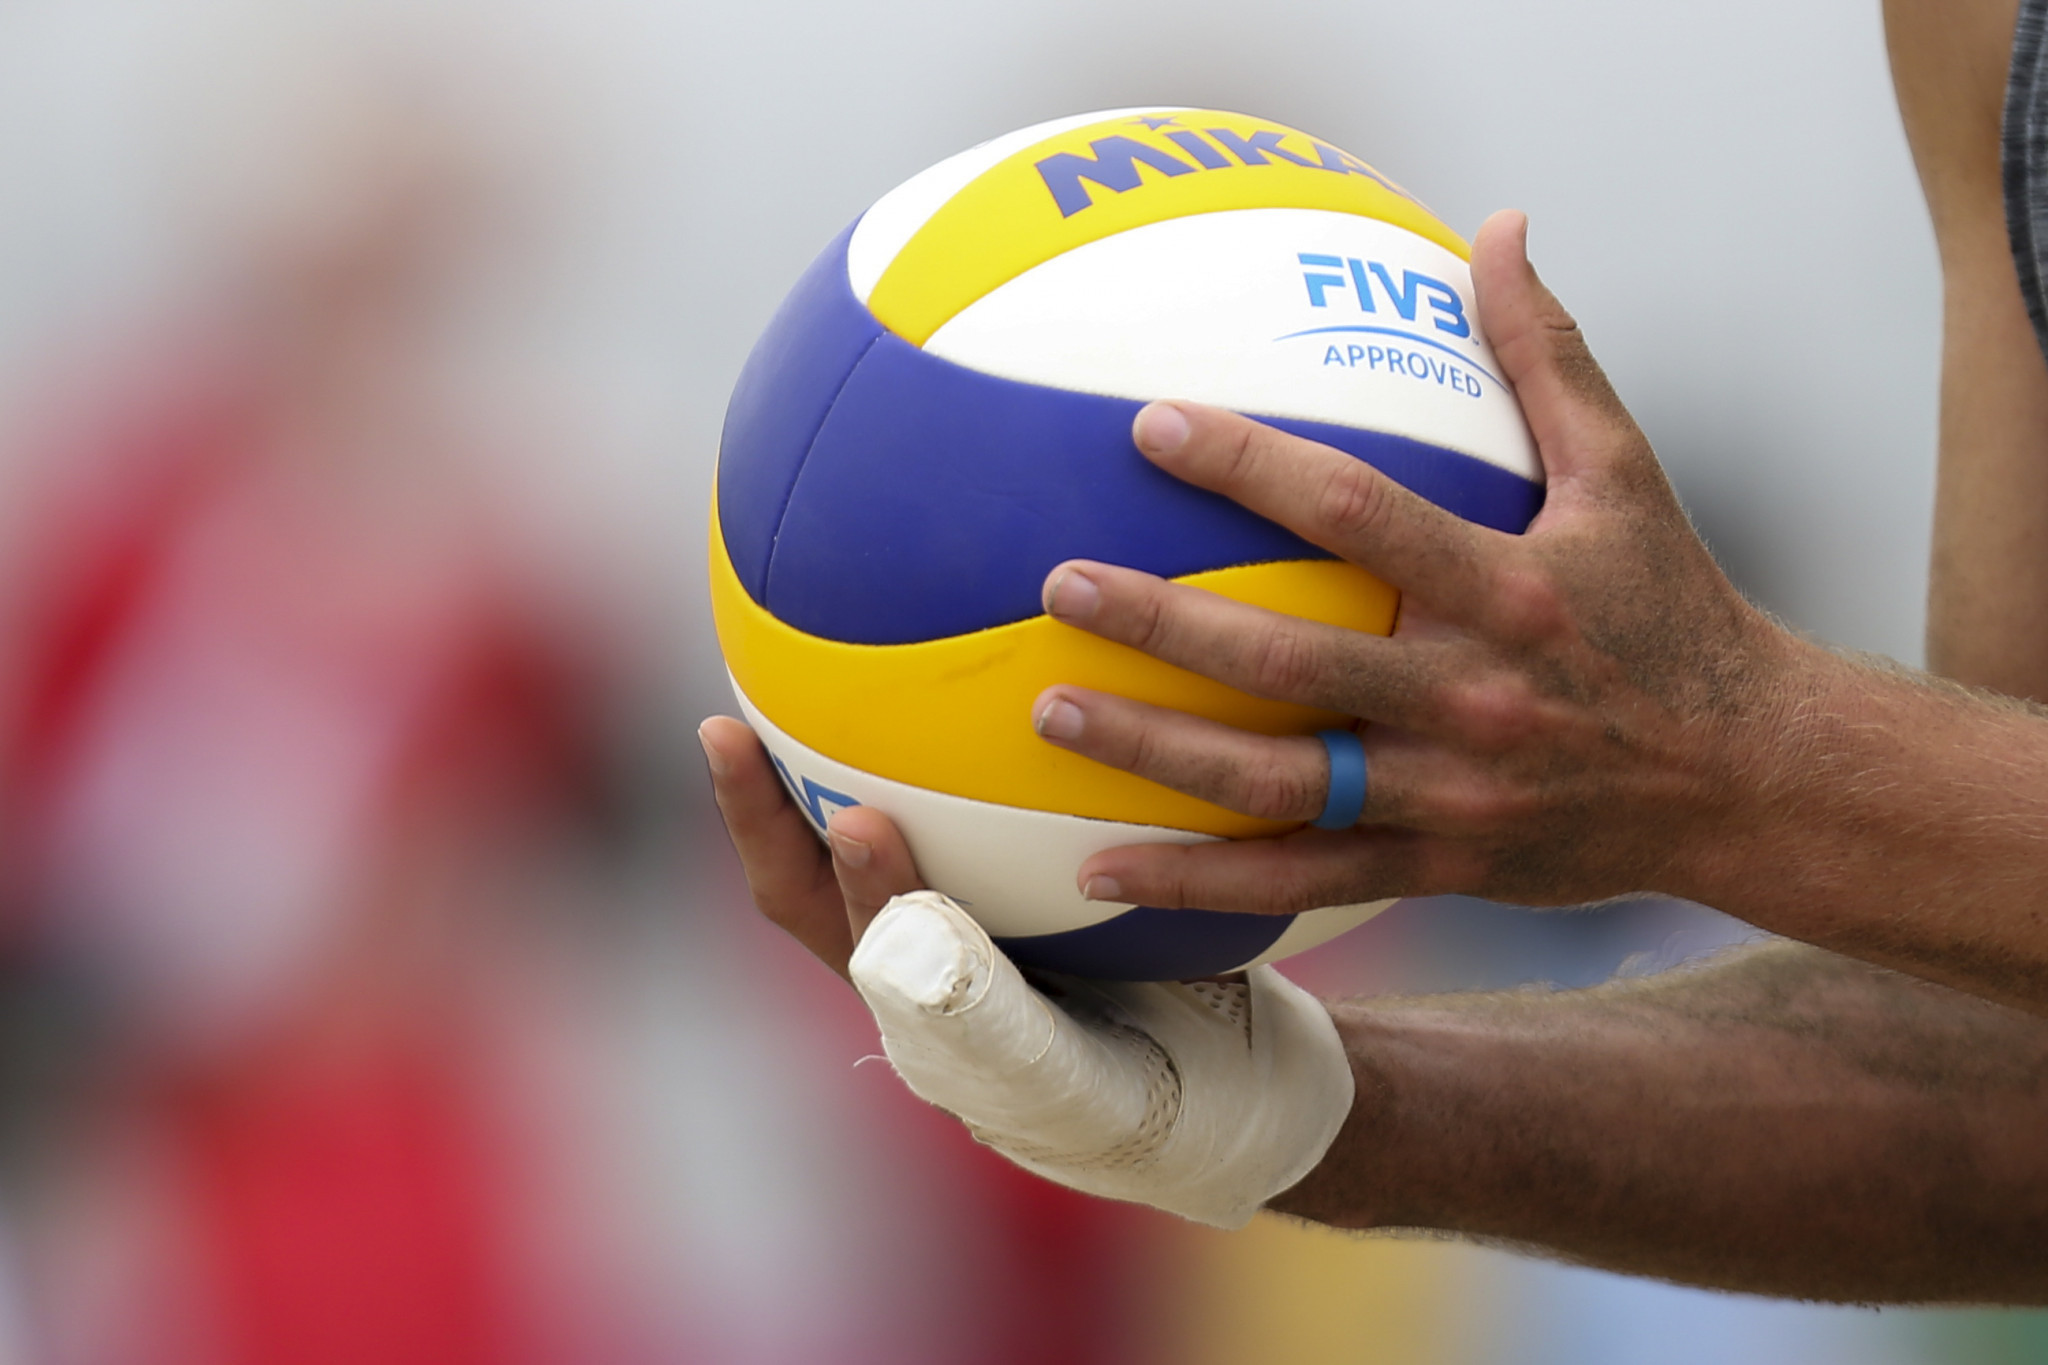 Kenya hoping beach volleyball qualifier results are annulled after coronavirus withdrawals